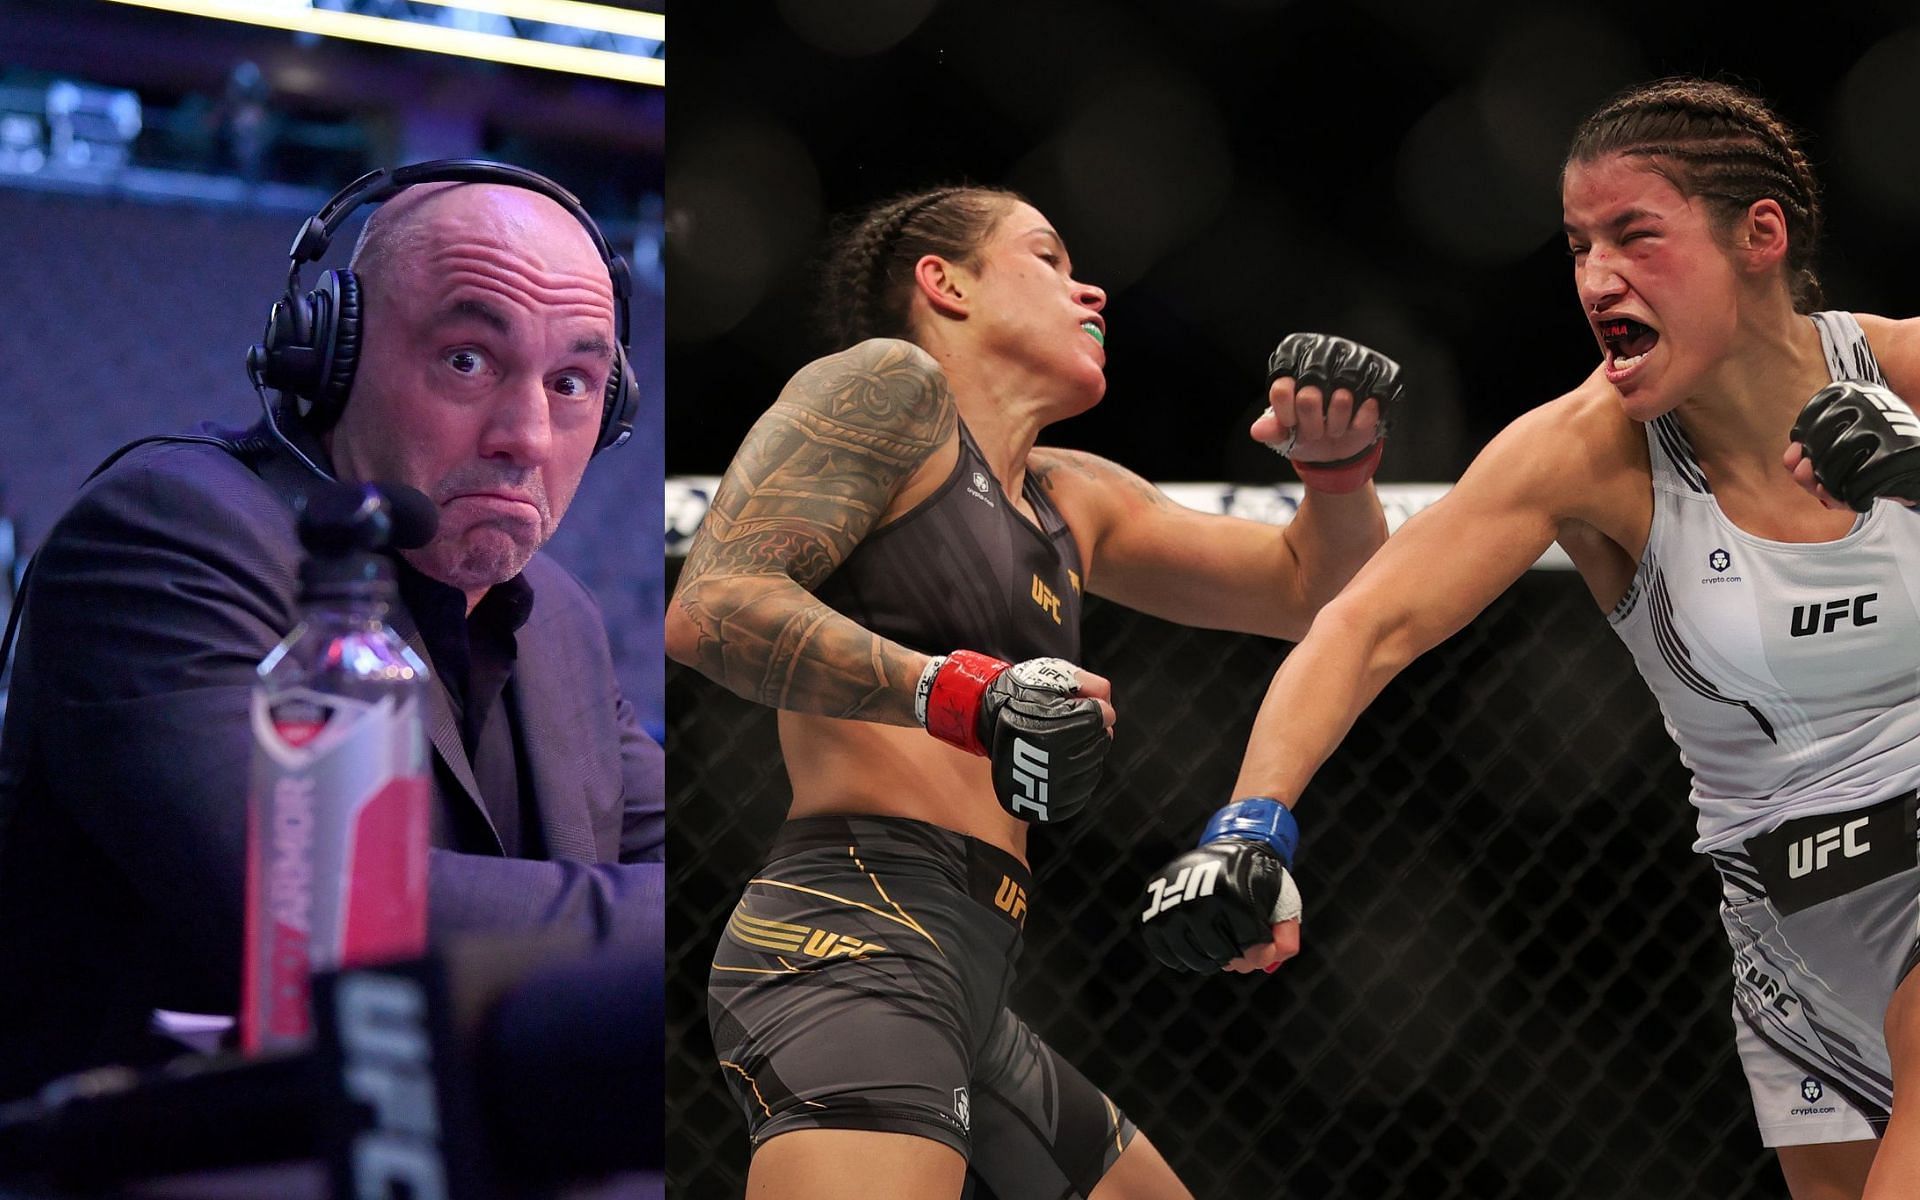 Joe Rogan took to Instagram to commend Julianna Pena and recalled the exciting moment when the Venezuelan Vixen was landing bombs on &#039;The Lioness&#039;